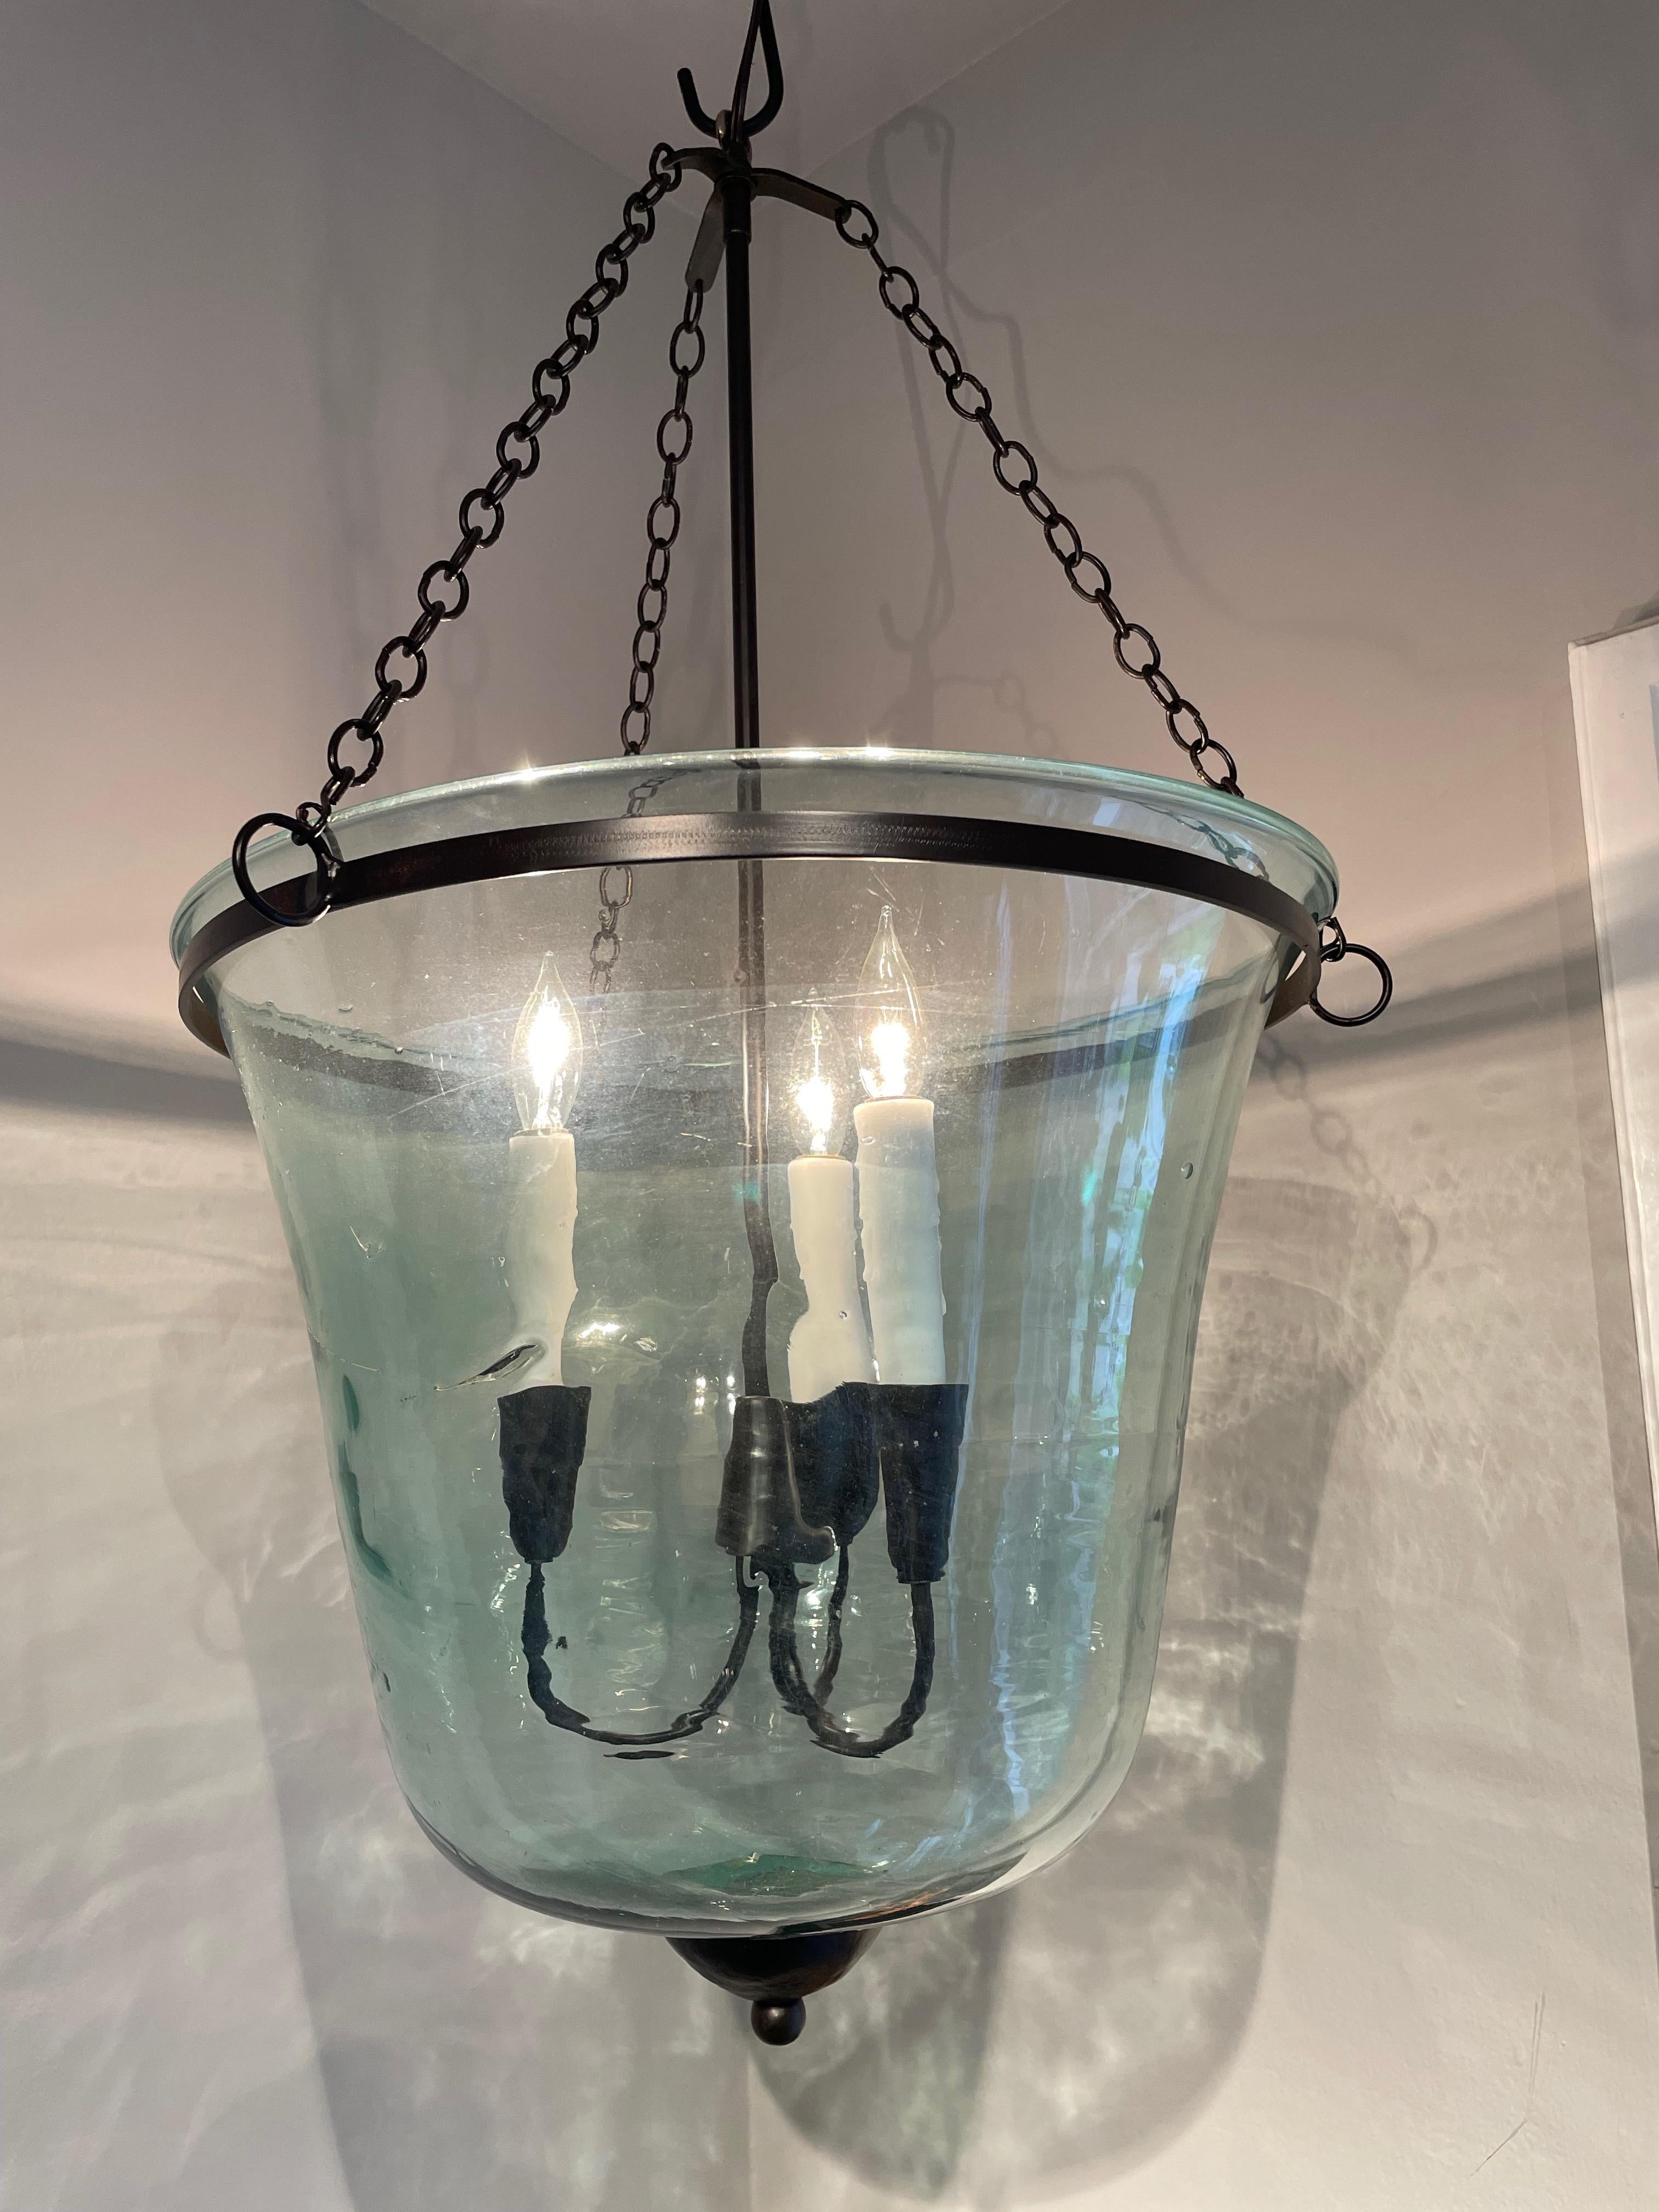 Hand-Crafted French 19th Century Handblown Glass Bell Cloche Hanging Light